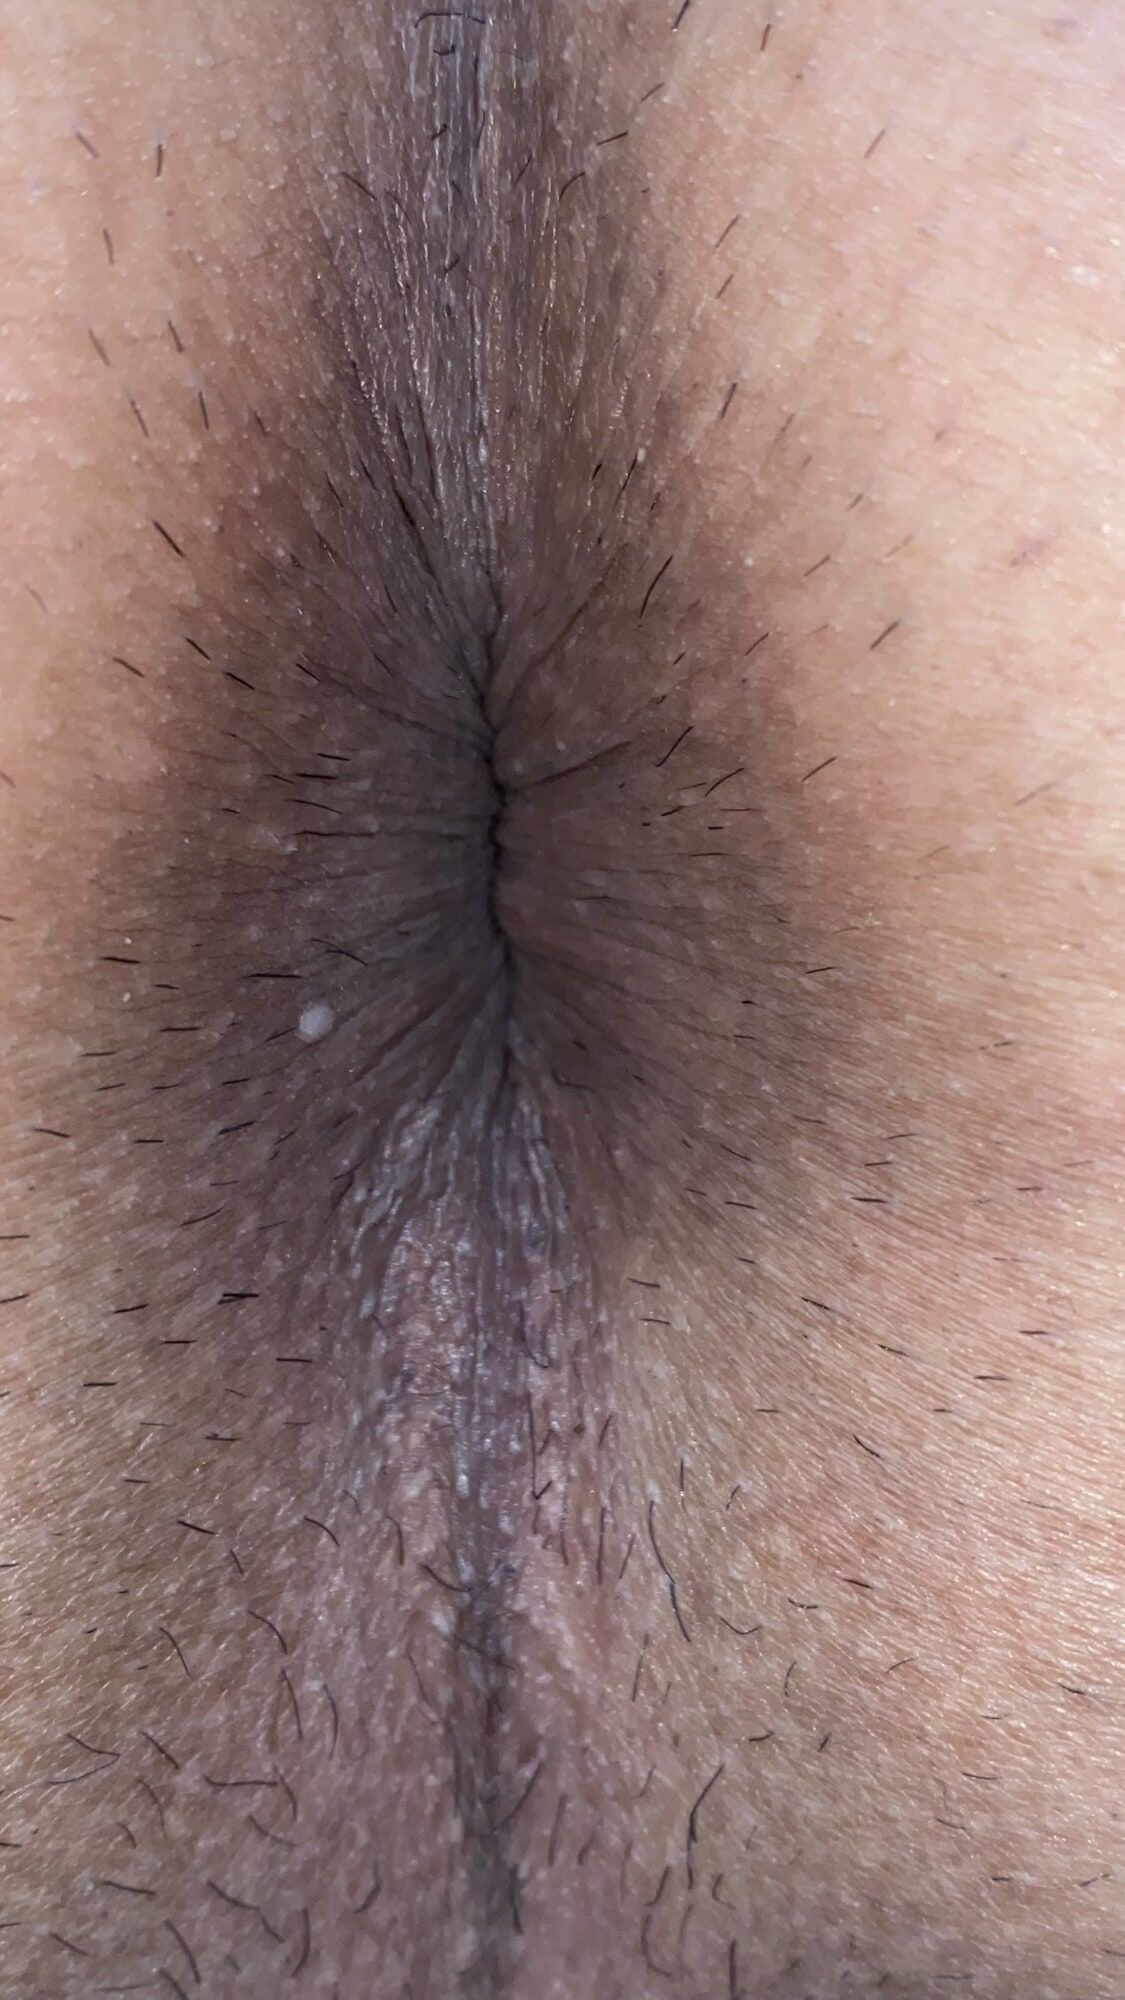 An image of my anus that is clear to every single wrinkle #14